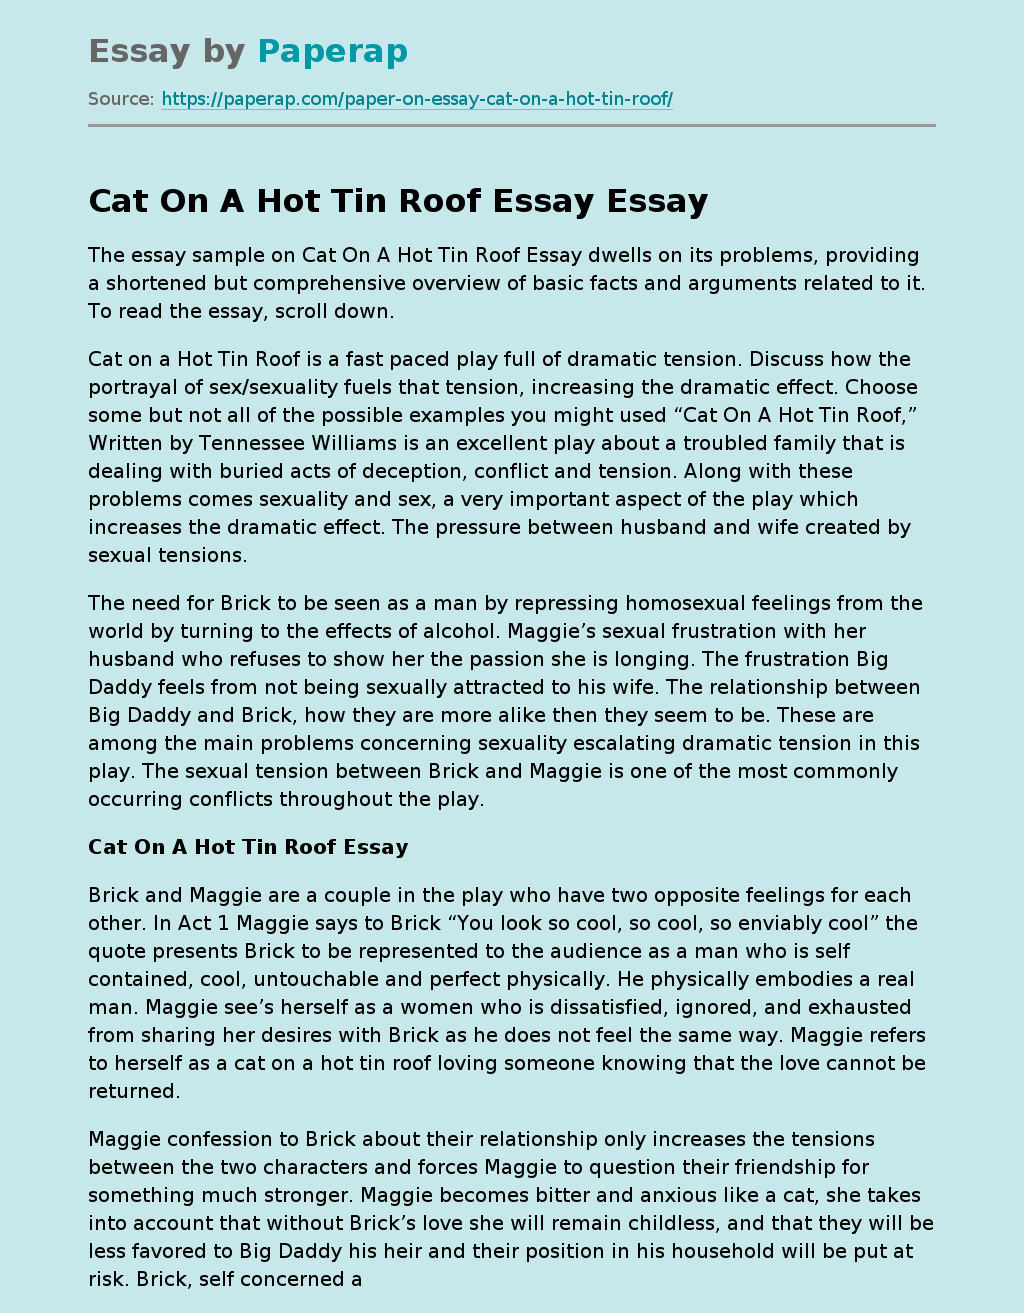 Cat On A Hot Tin Roof Essay